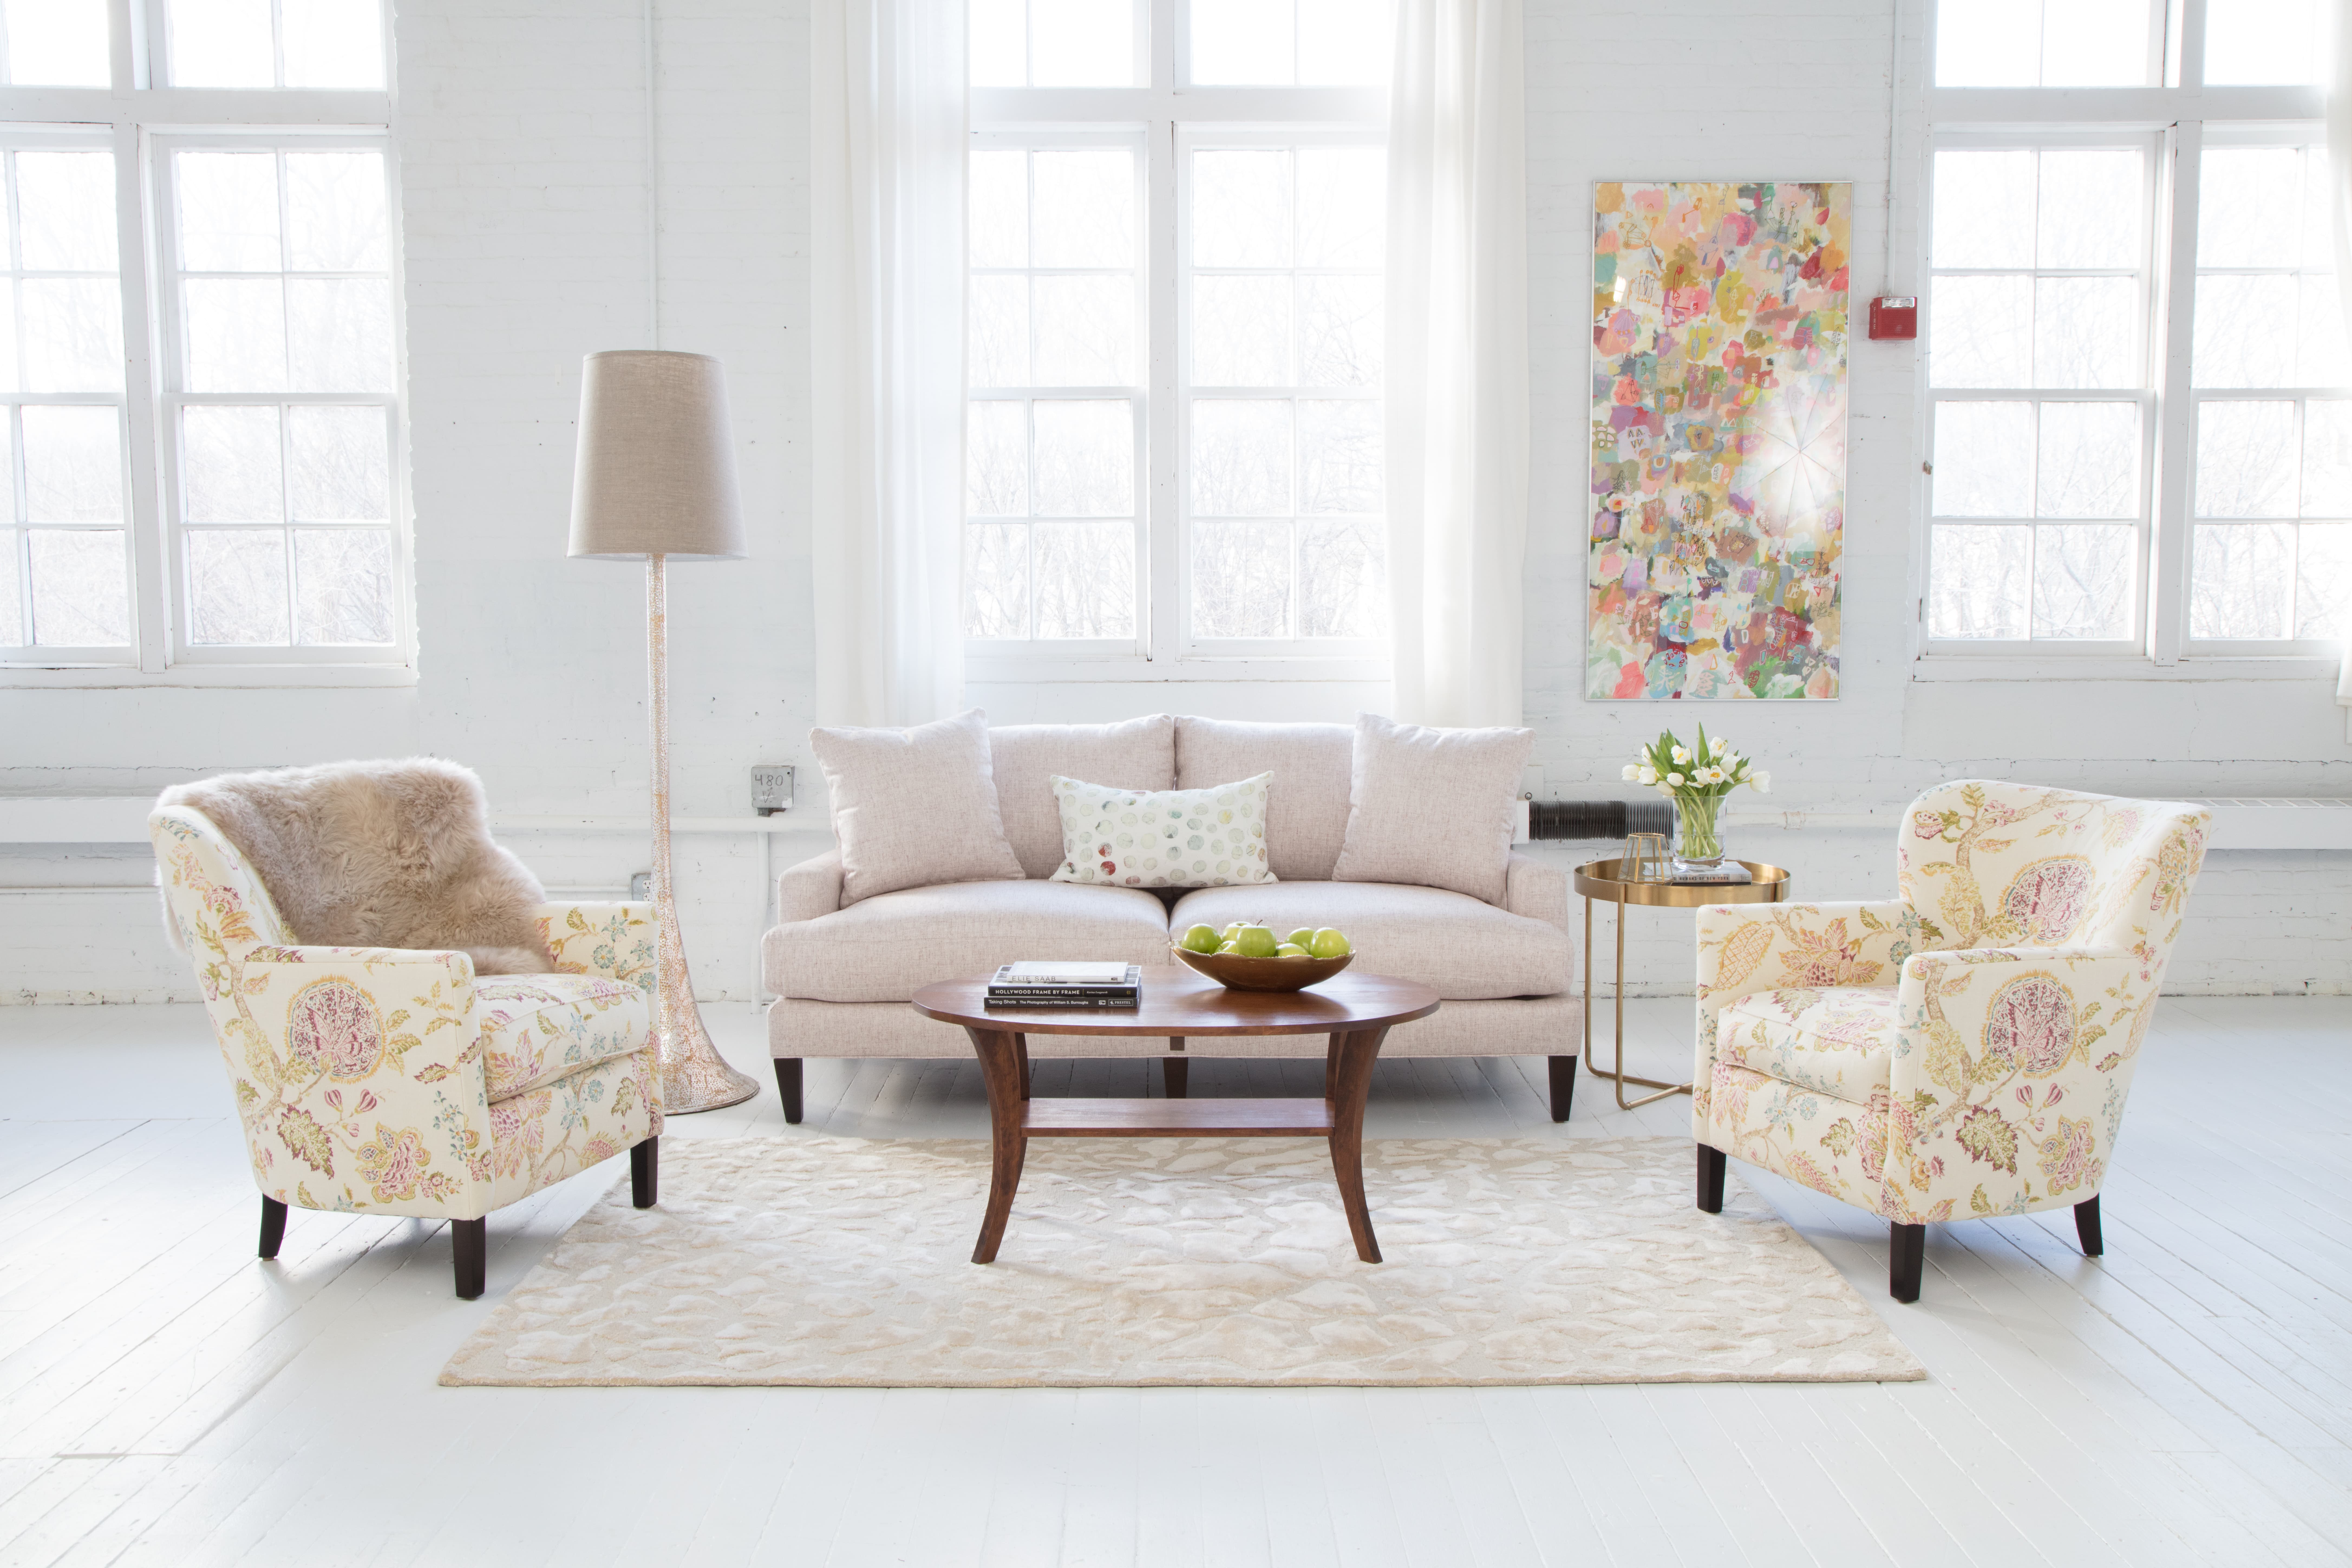 fully furnished living room with light pastel colors